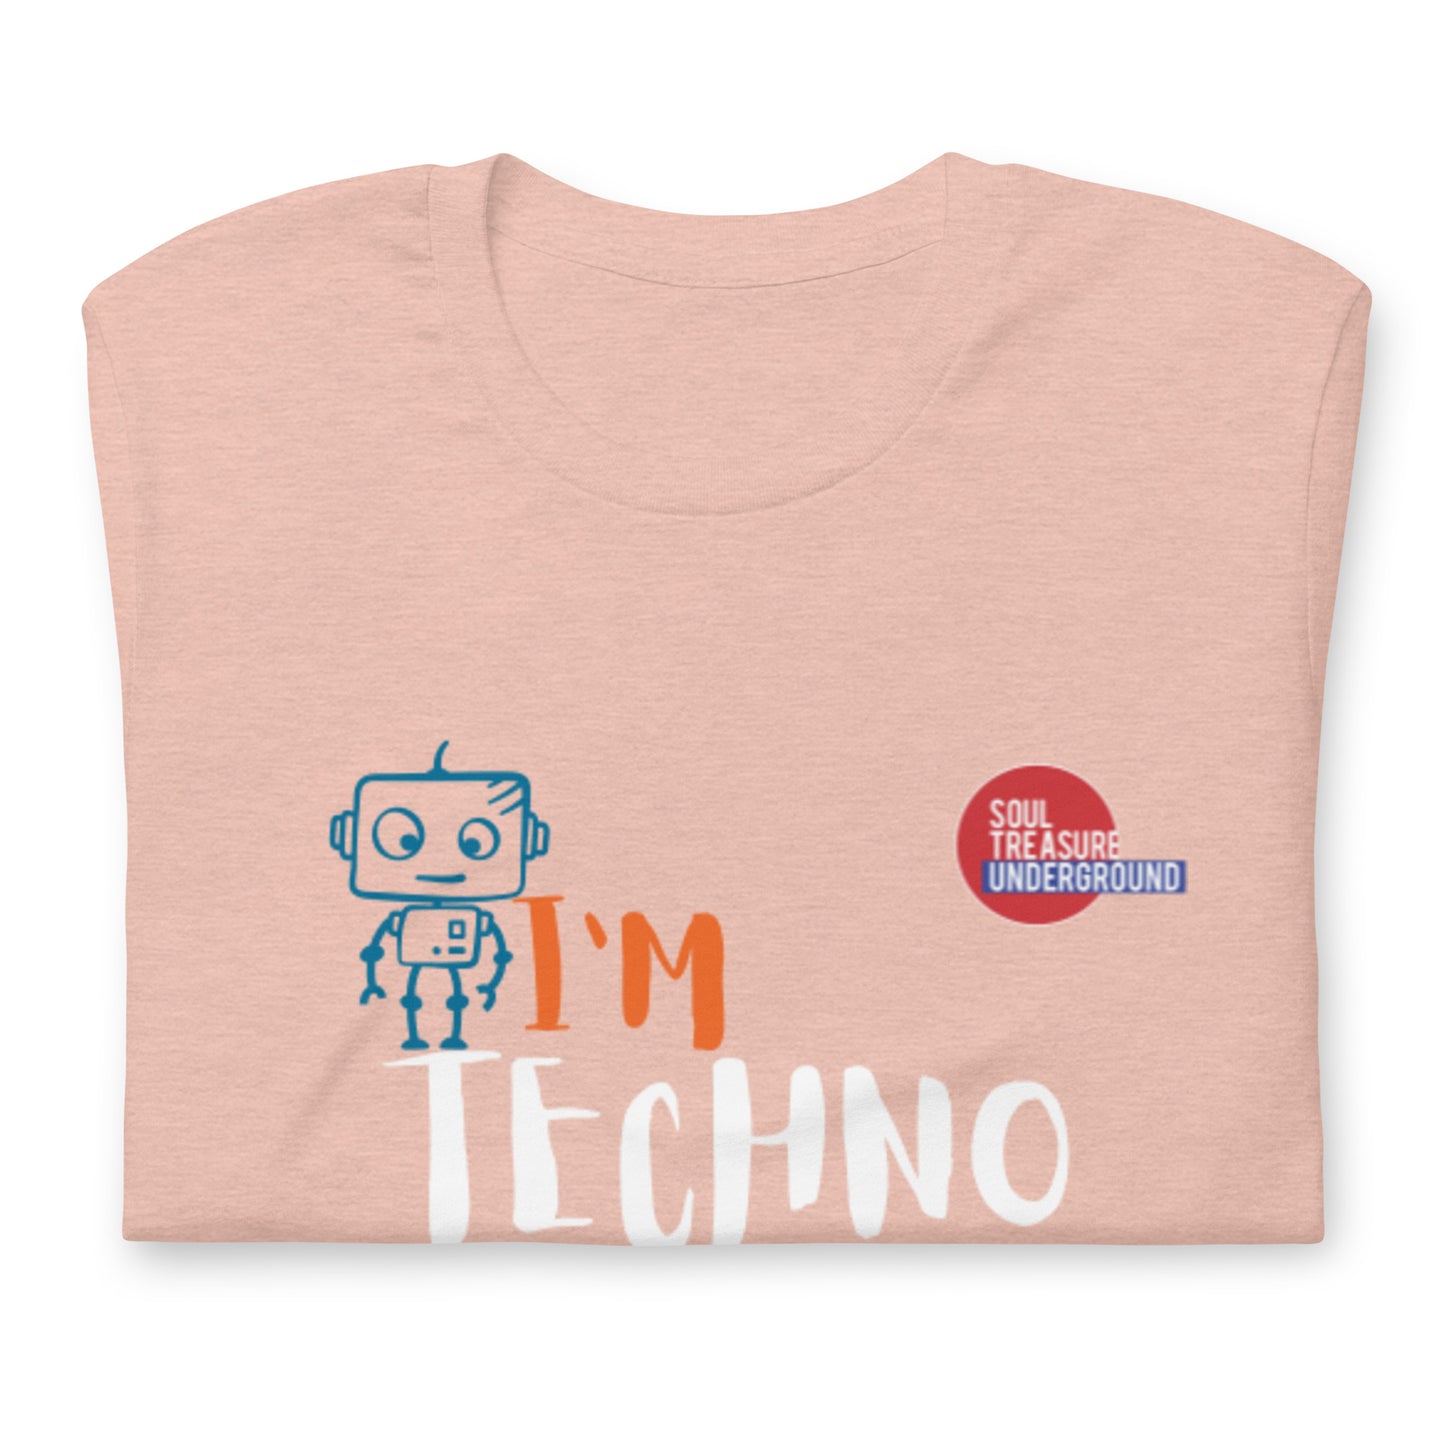 I'M TECHNO (Official Logo) T-Shirt (available in multiple NEW colors)